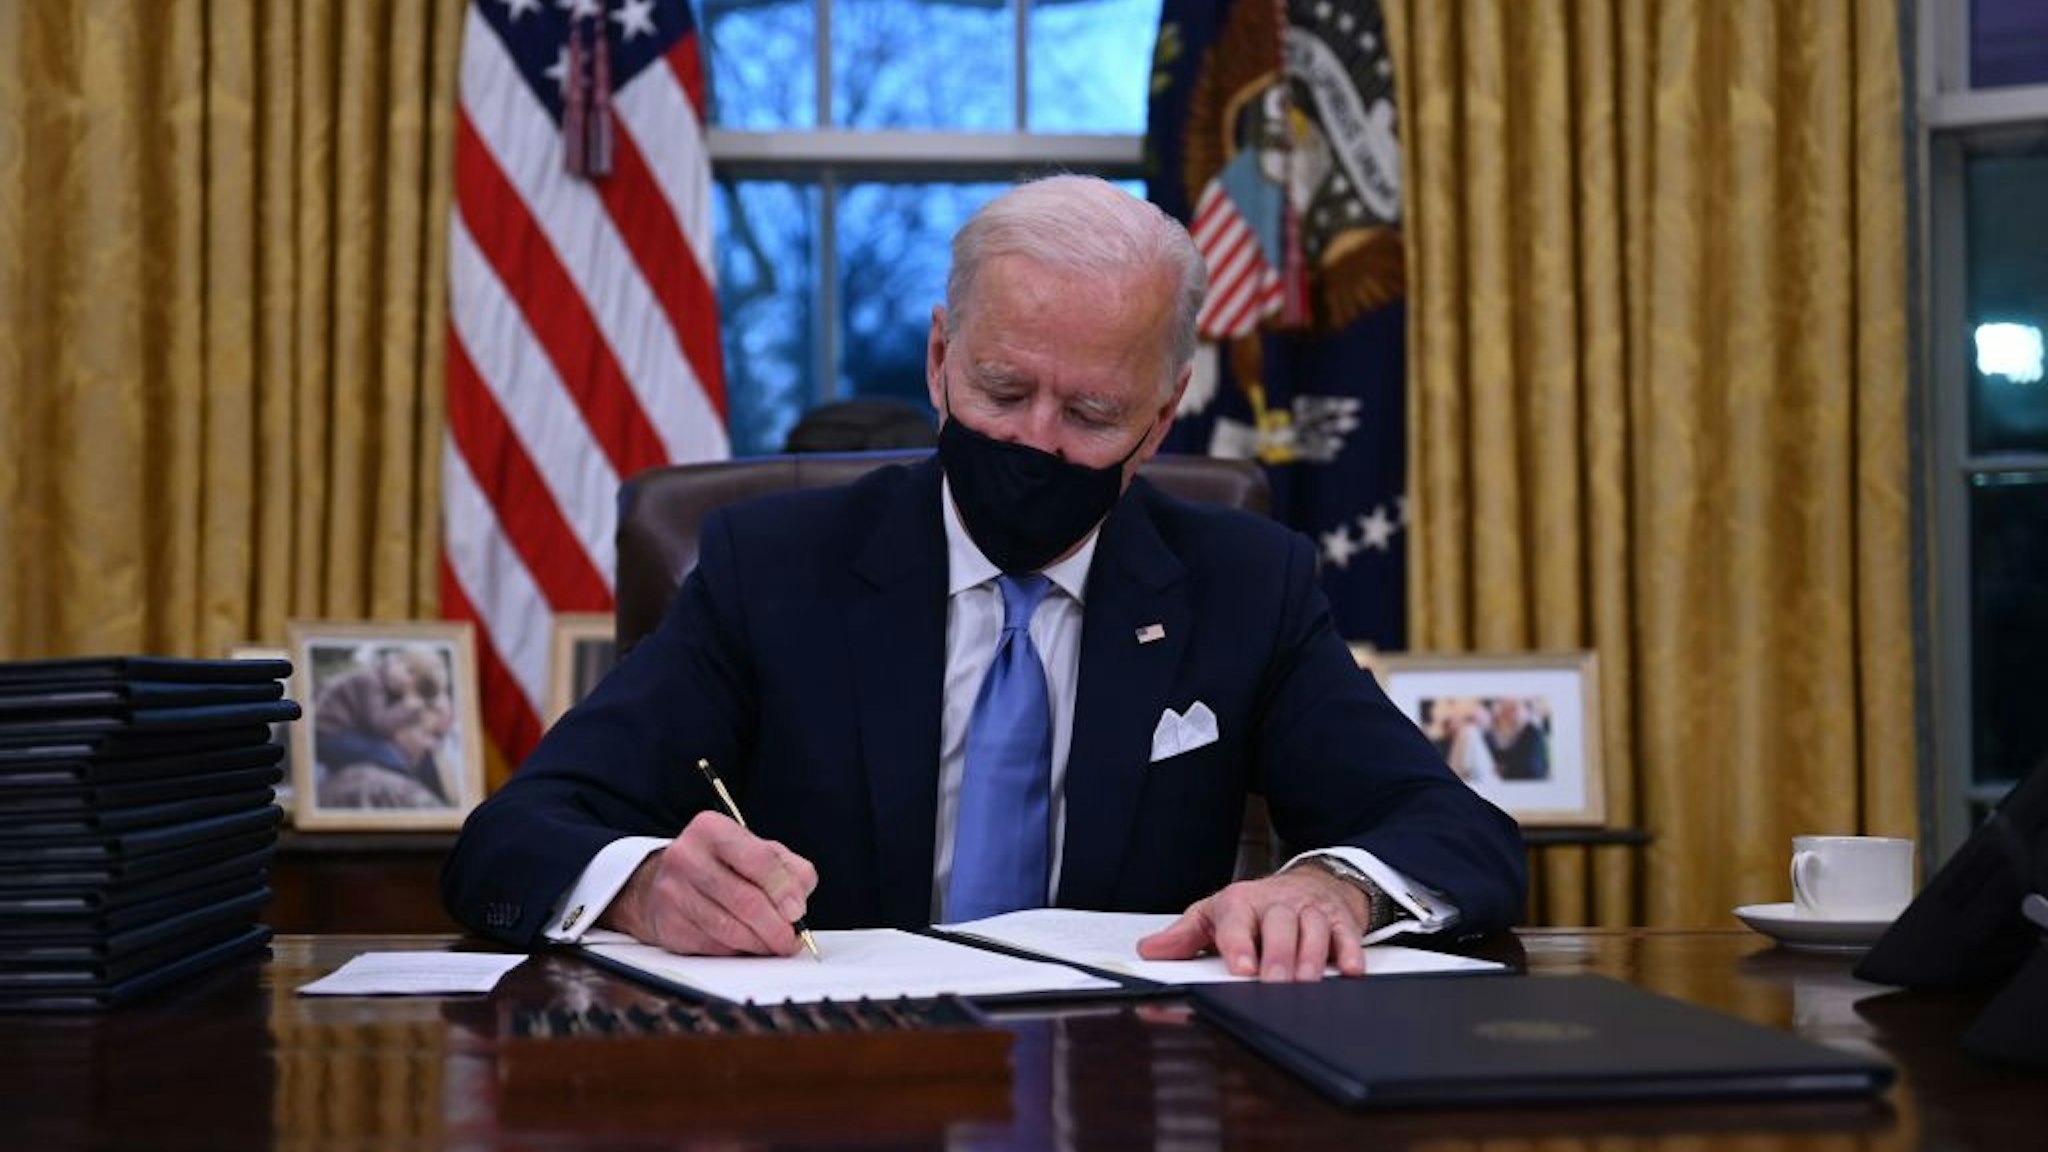 TOPSHOT - US President Joe Biden sits in the Oval Office as he signs a series of orders at the White House in Washington, DC, after being sworn in at the US Capitol on January 20, 2021. - US President Joe Biden signed a raft of executive orders to launch his administration, including a decision to rejoin the Paris climate accord. The orders were aimed at reversing decisions by his predecessor, reversing the process of leaving the World Health Organization, ending the ban on entries from mostly Muslim-majority countries, bolstering environmental protections and strengthening the fight against Covid-19. (Photo by Jim WATSON / AFP) (Photo by JIM WATSON/AFP via Getty Images)